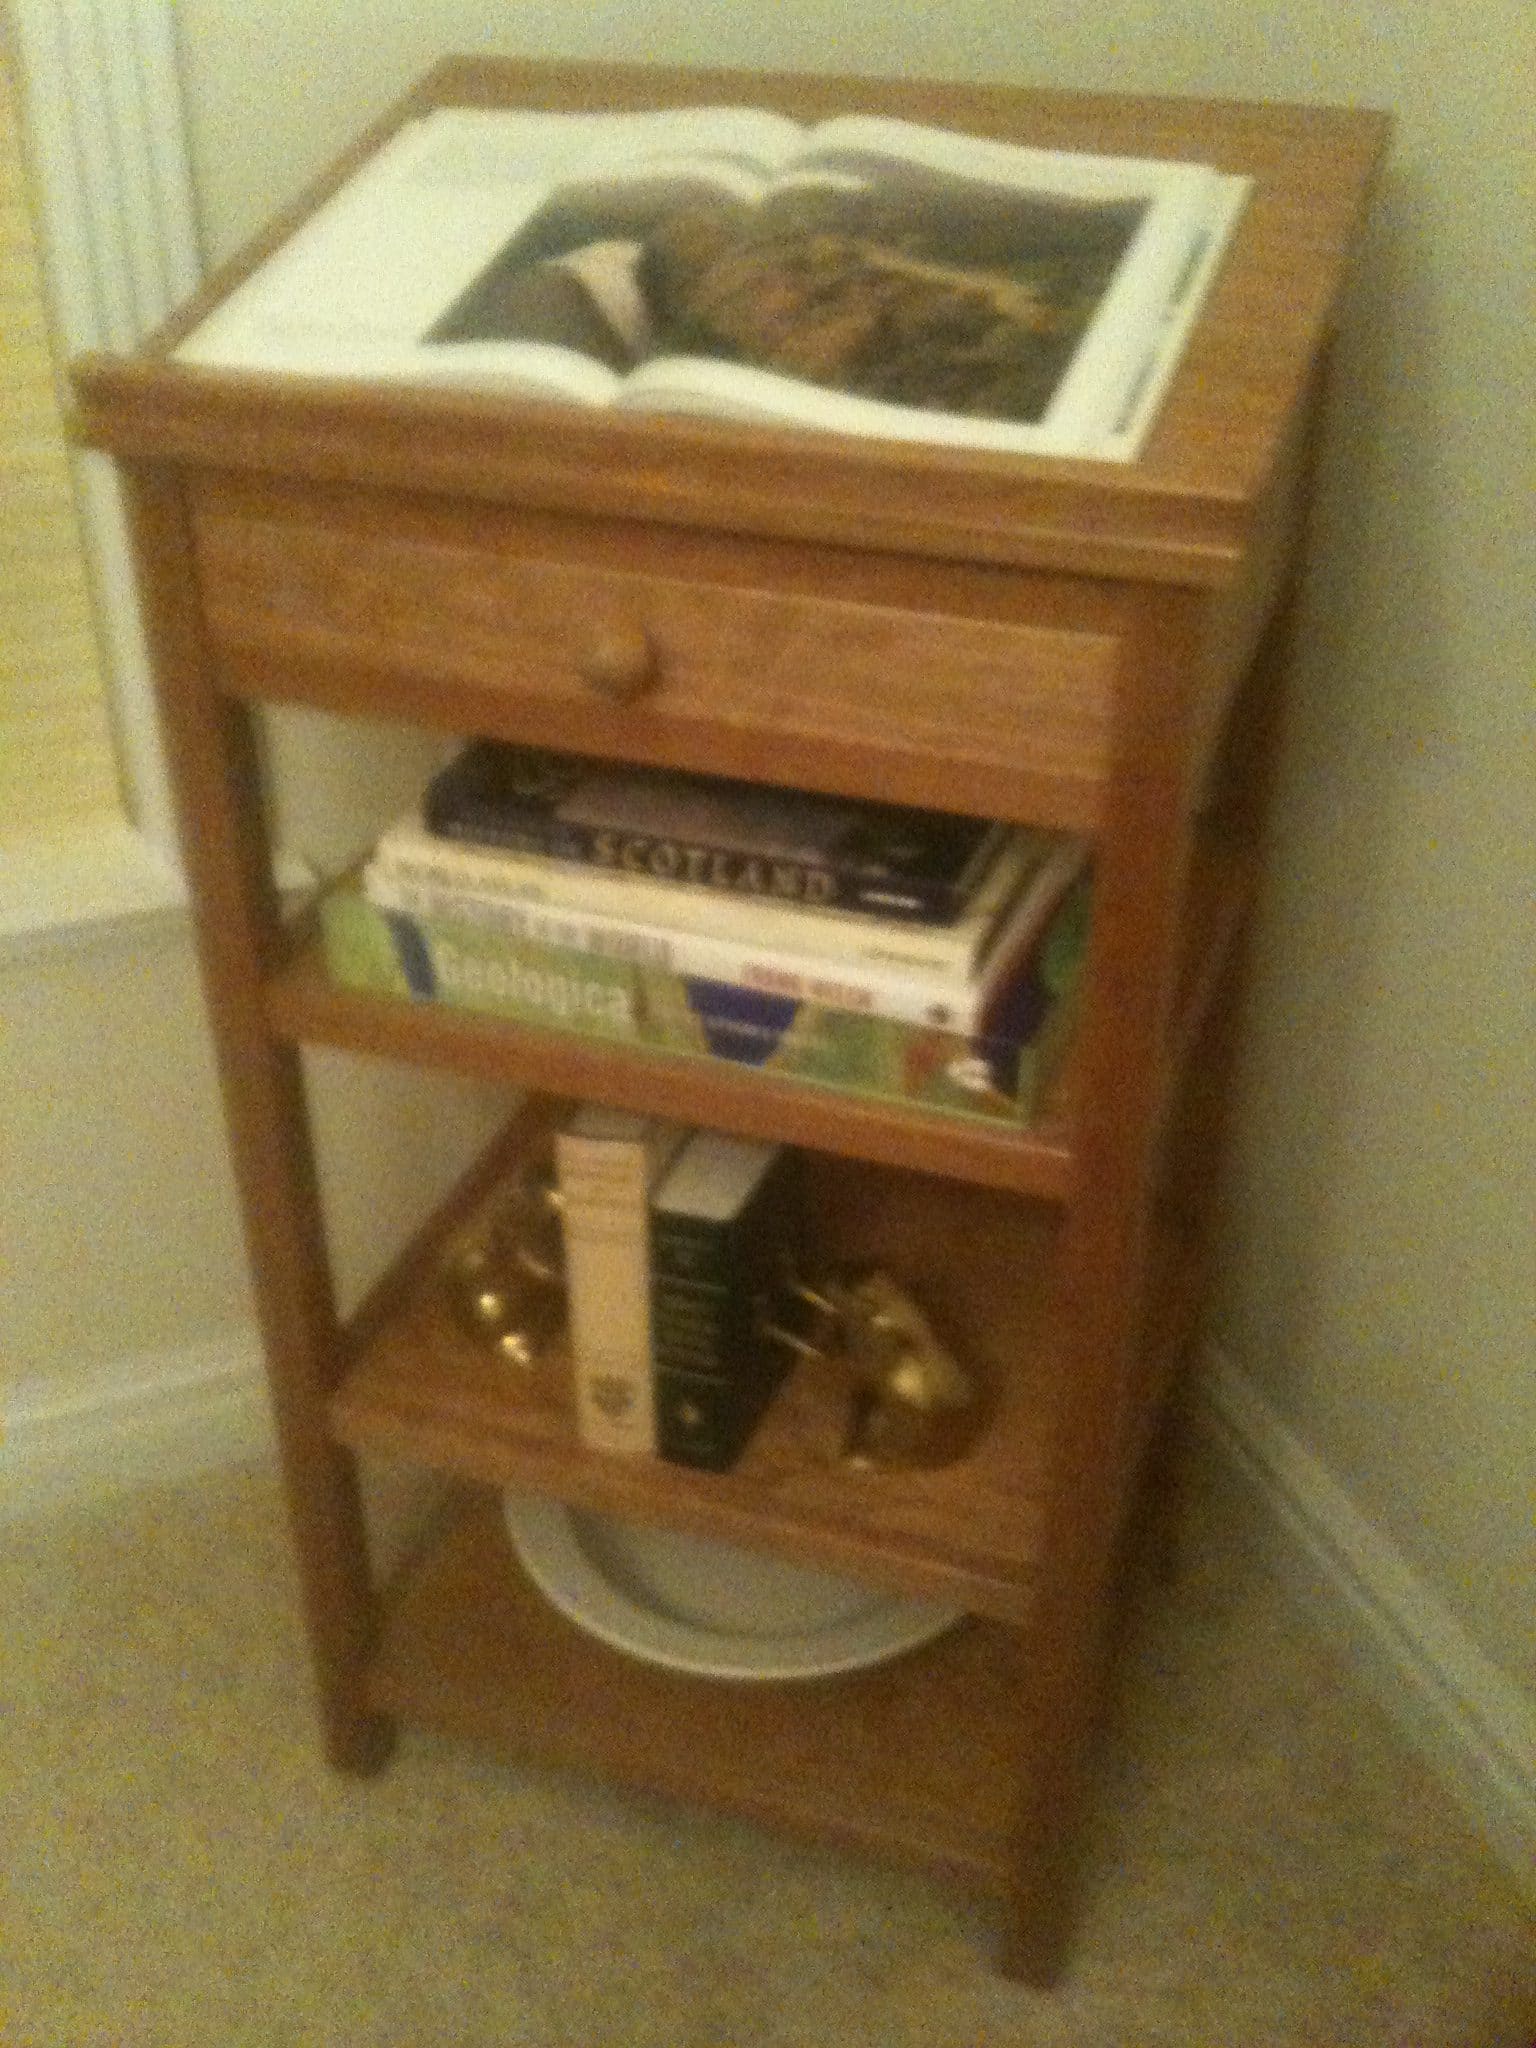 Dictionary Stand by Bill Sproat